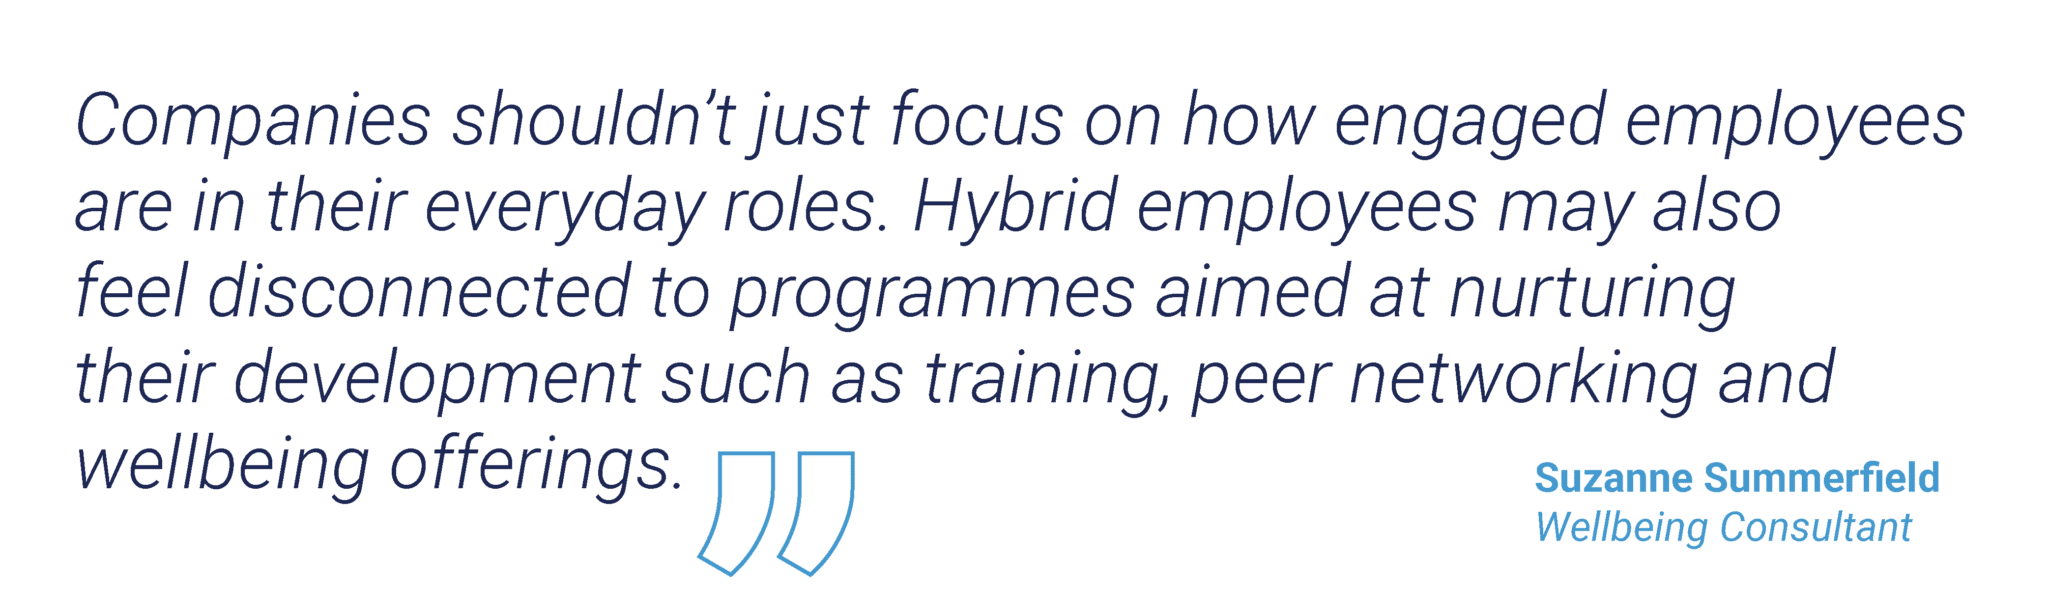 “Companies shouldn’t just focus on how engaged employees are in their everyday roles. Hybrid employees may also feel disconnected to programmes aimed at nurturing their development such as training, peer networking and wellbeing offerings.”  Suzanne Summerfield, Wellbeing Consultant